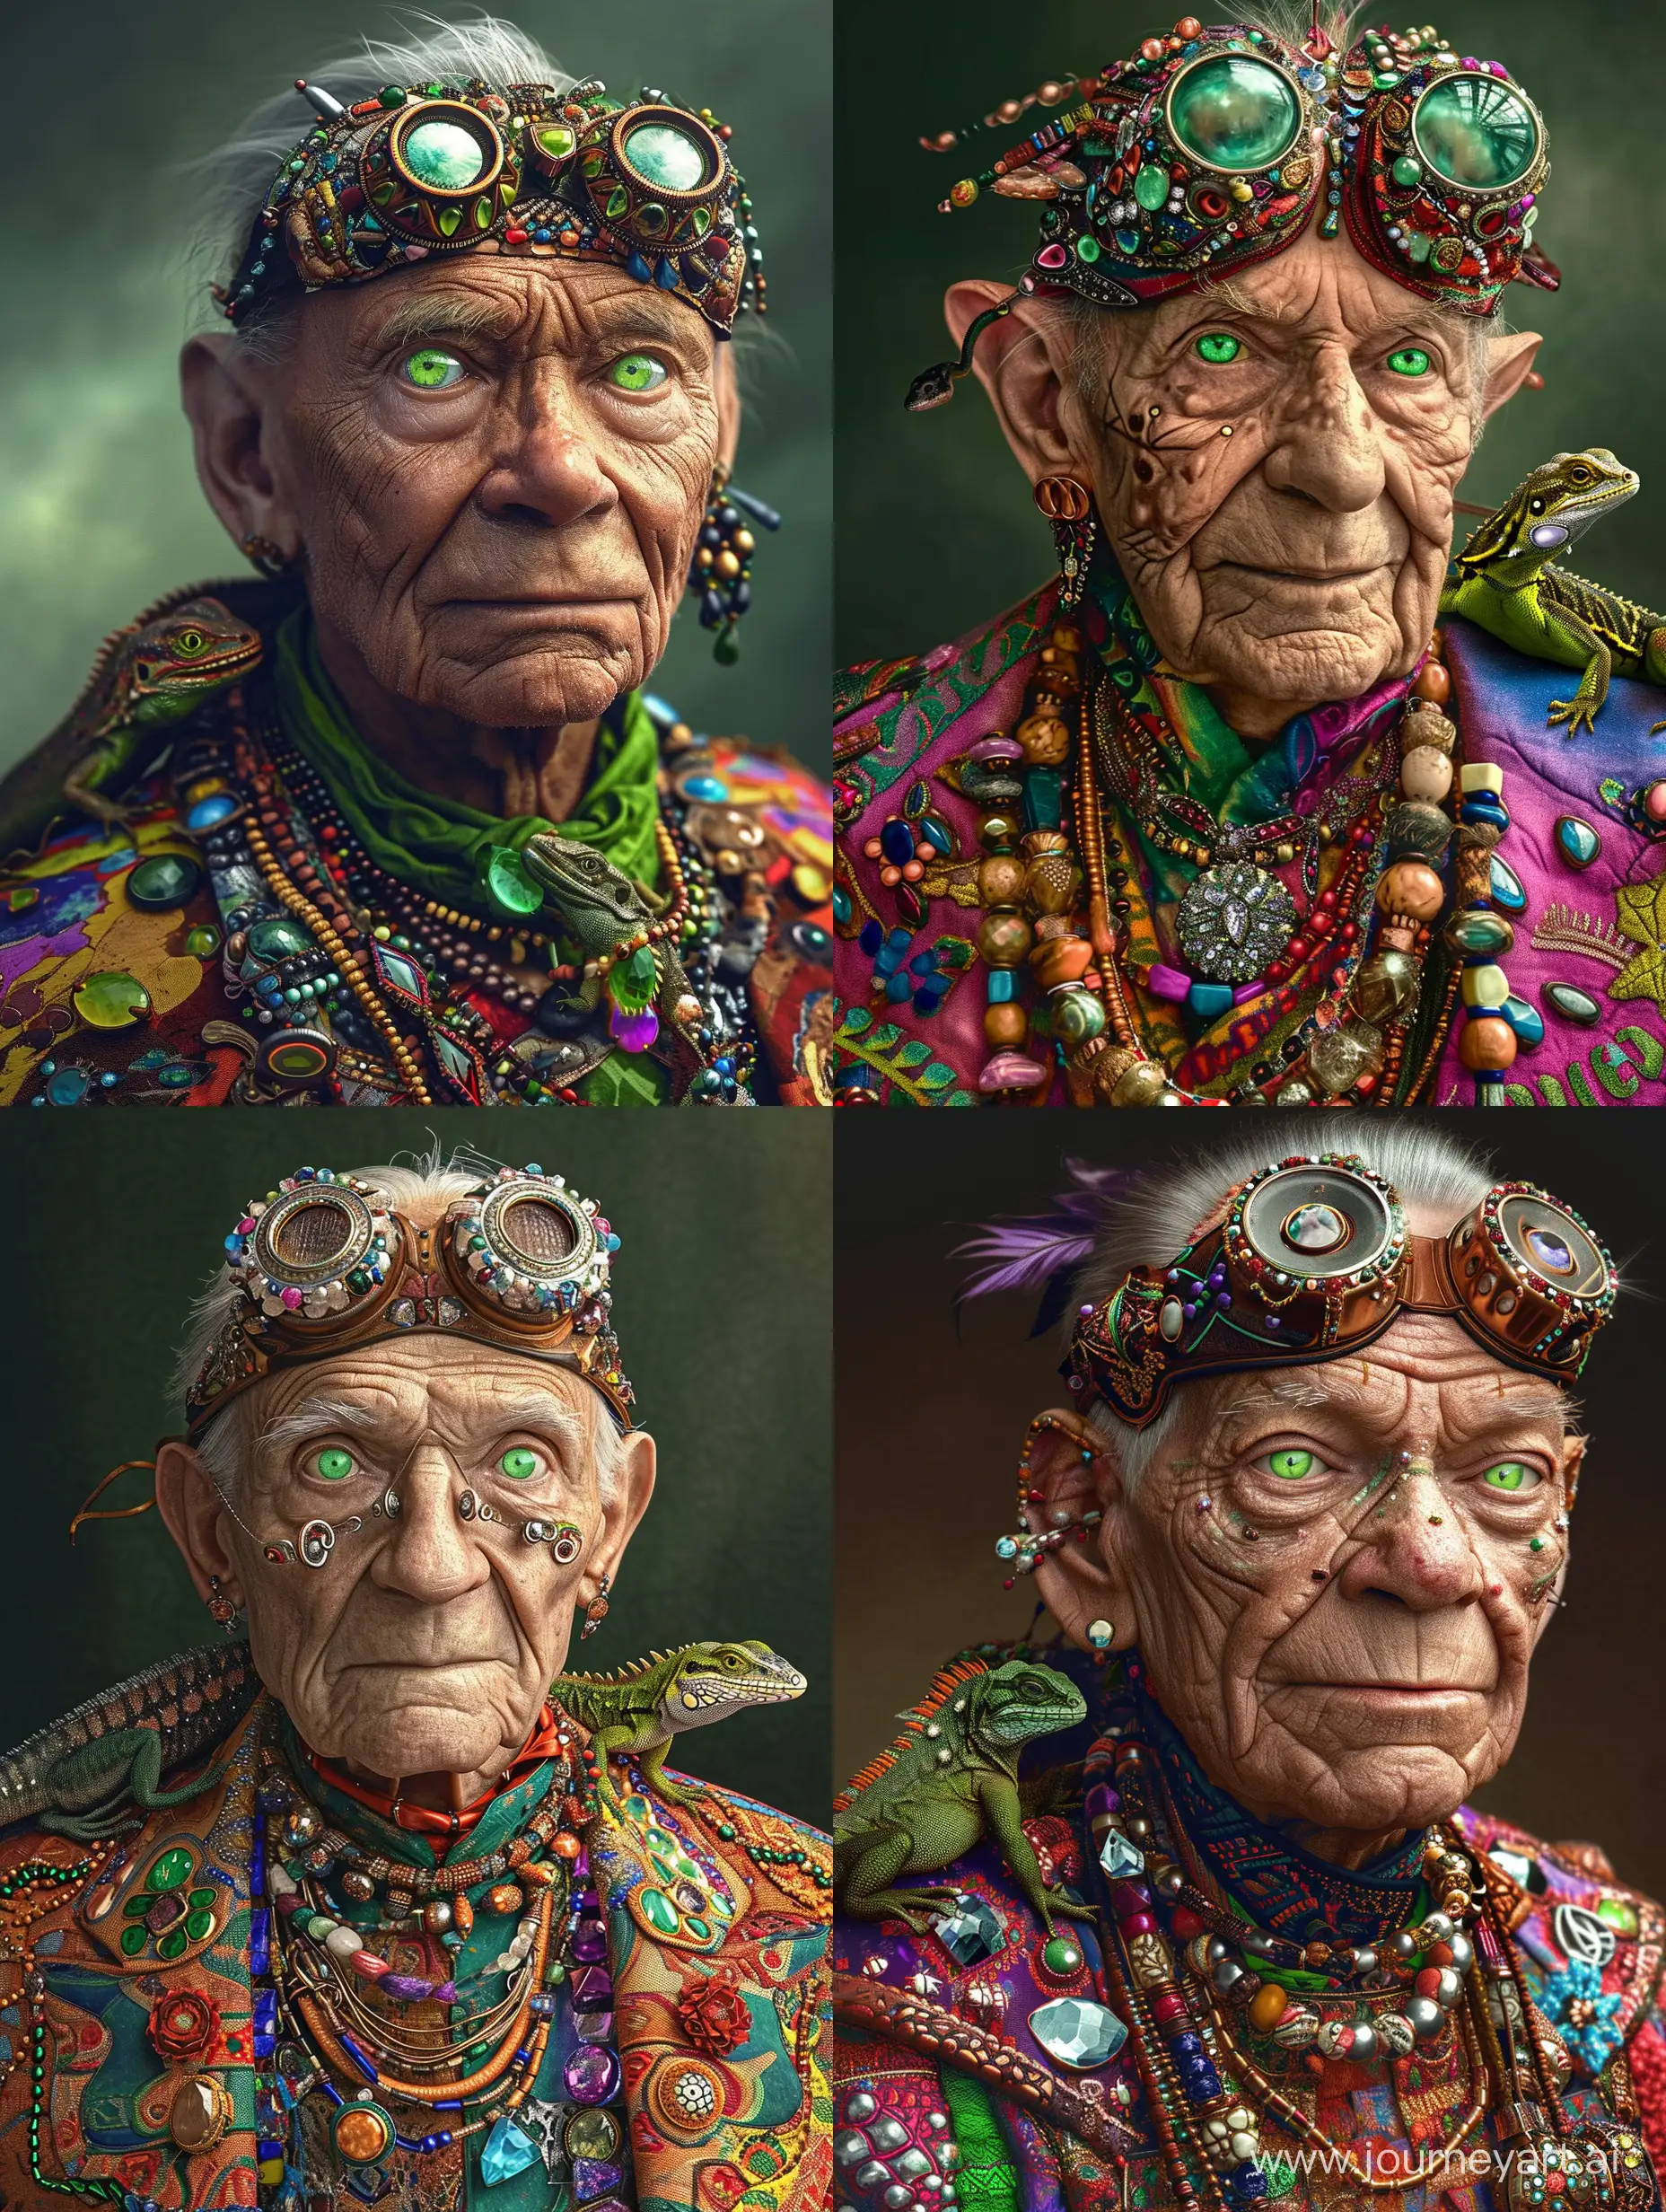 Colorful-Elderly-Man-with-GemstoneAdorned-Suit-and-Lizard-Companion